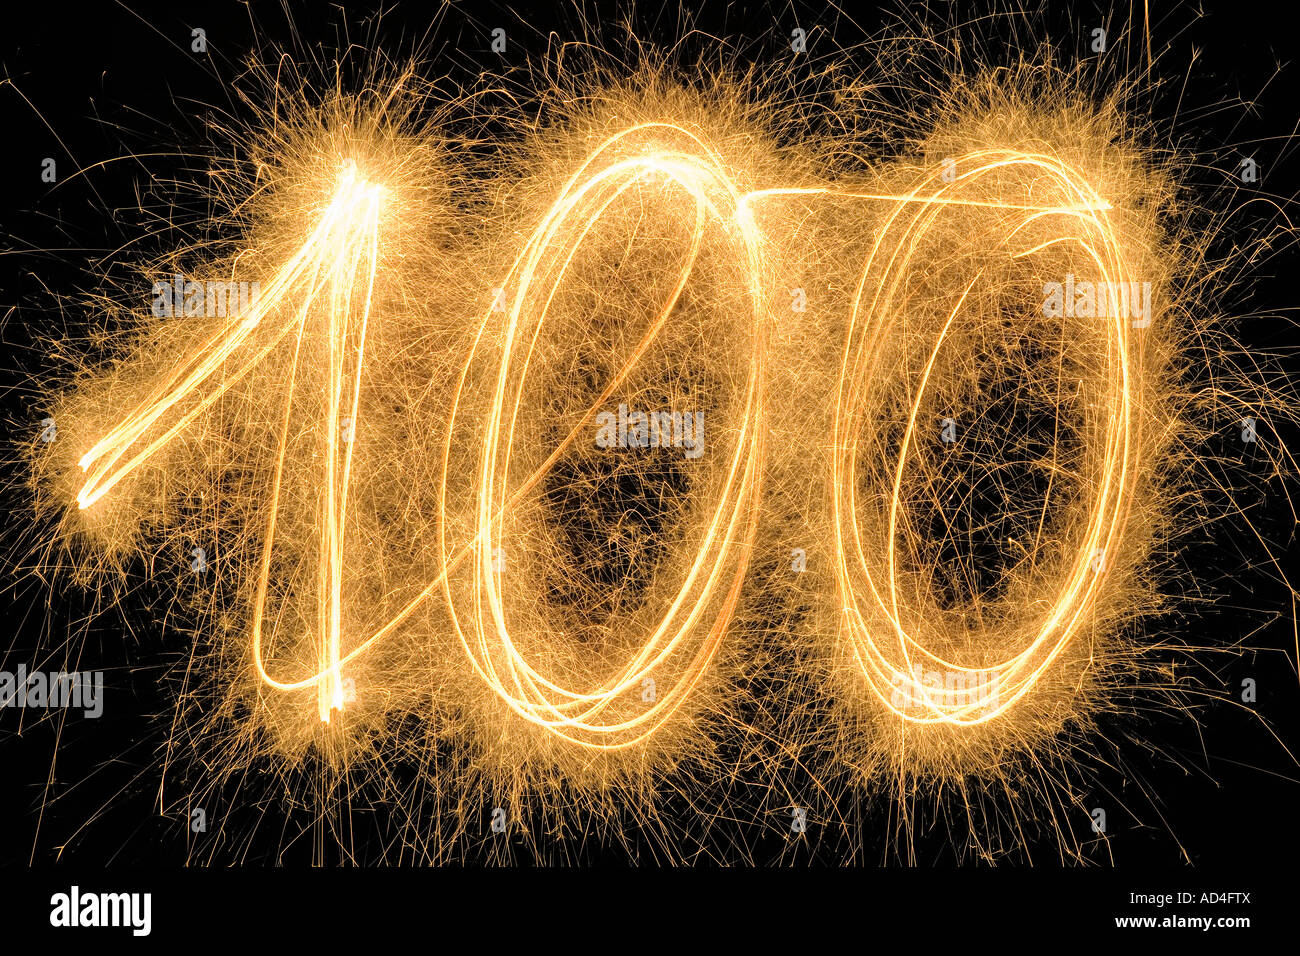 100' drawn with a sparkler Stock Photo